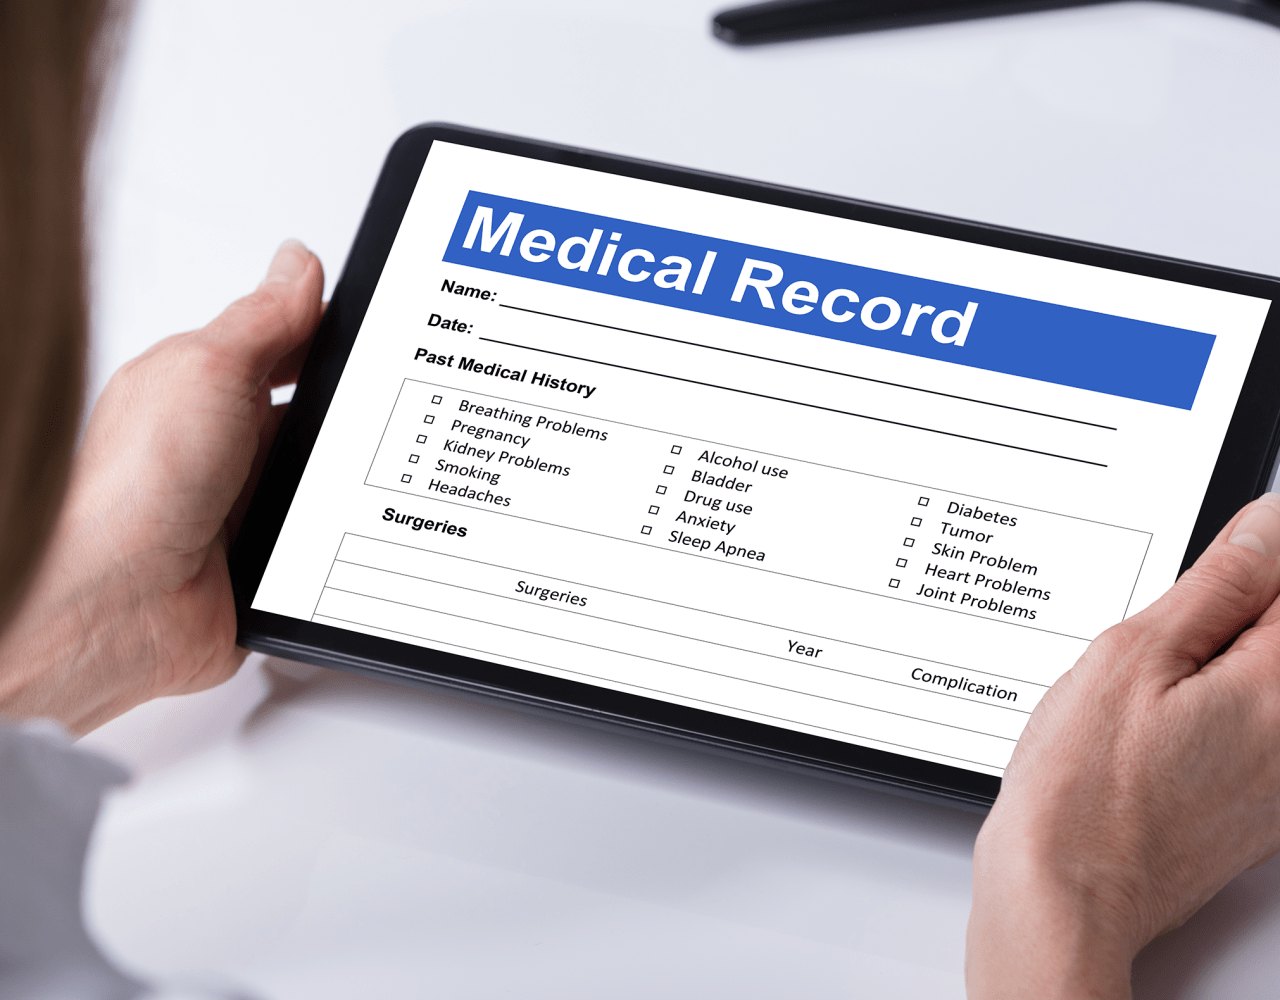 Electronic Patient Records Impact on Healthcare Industry